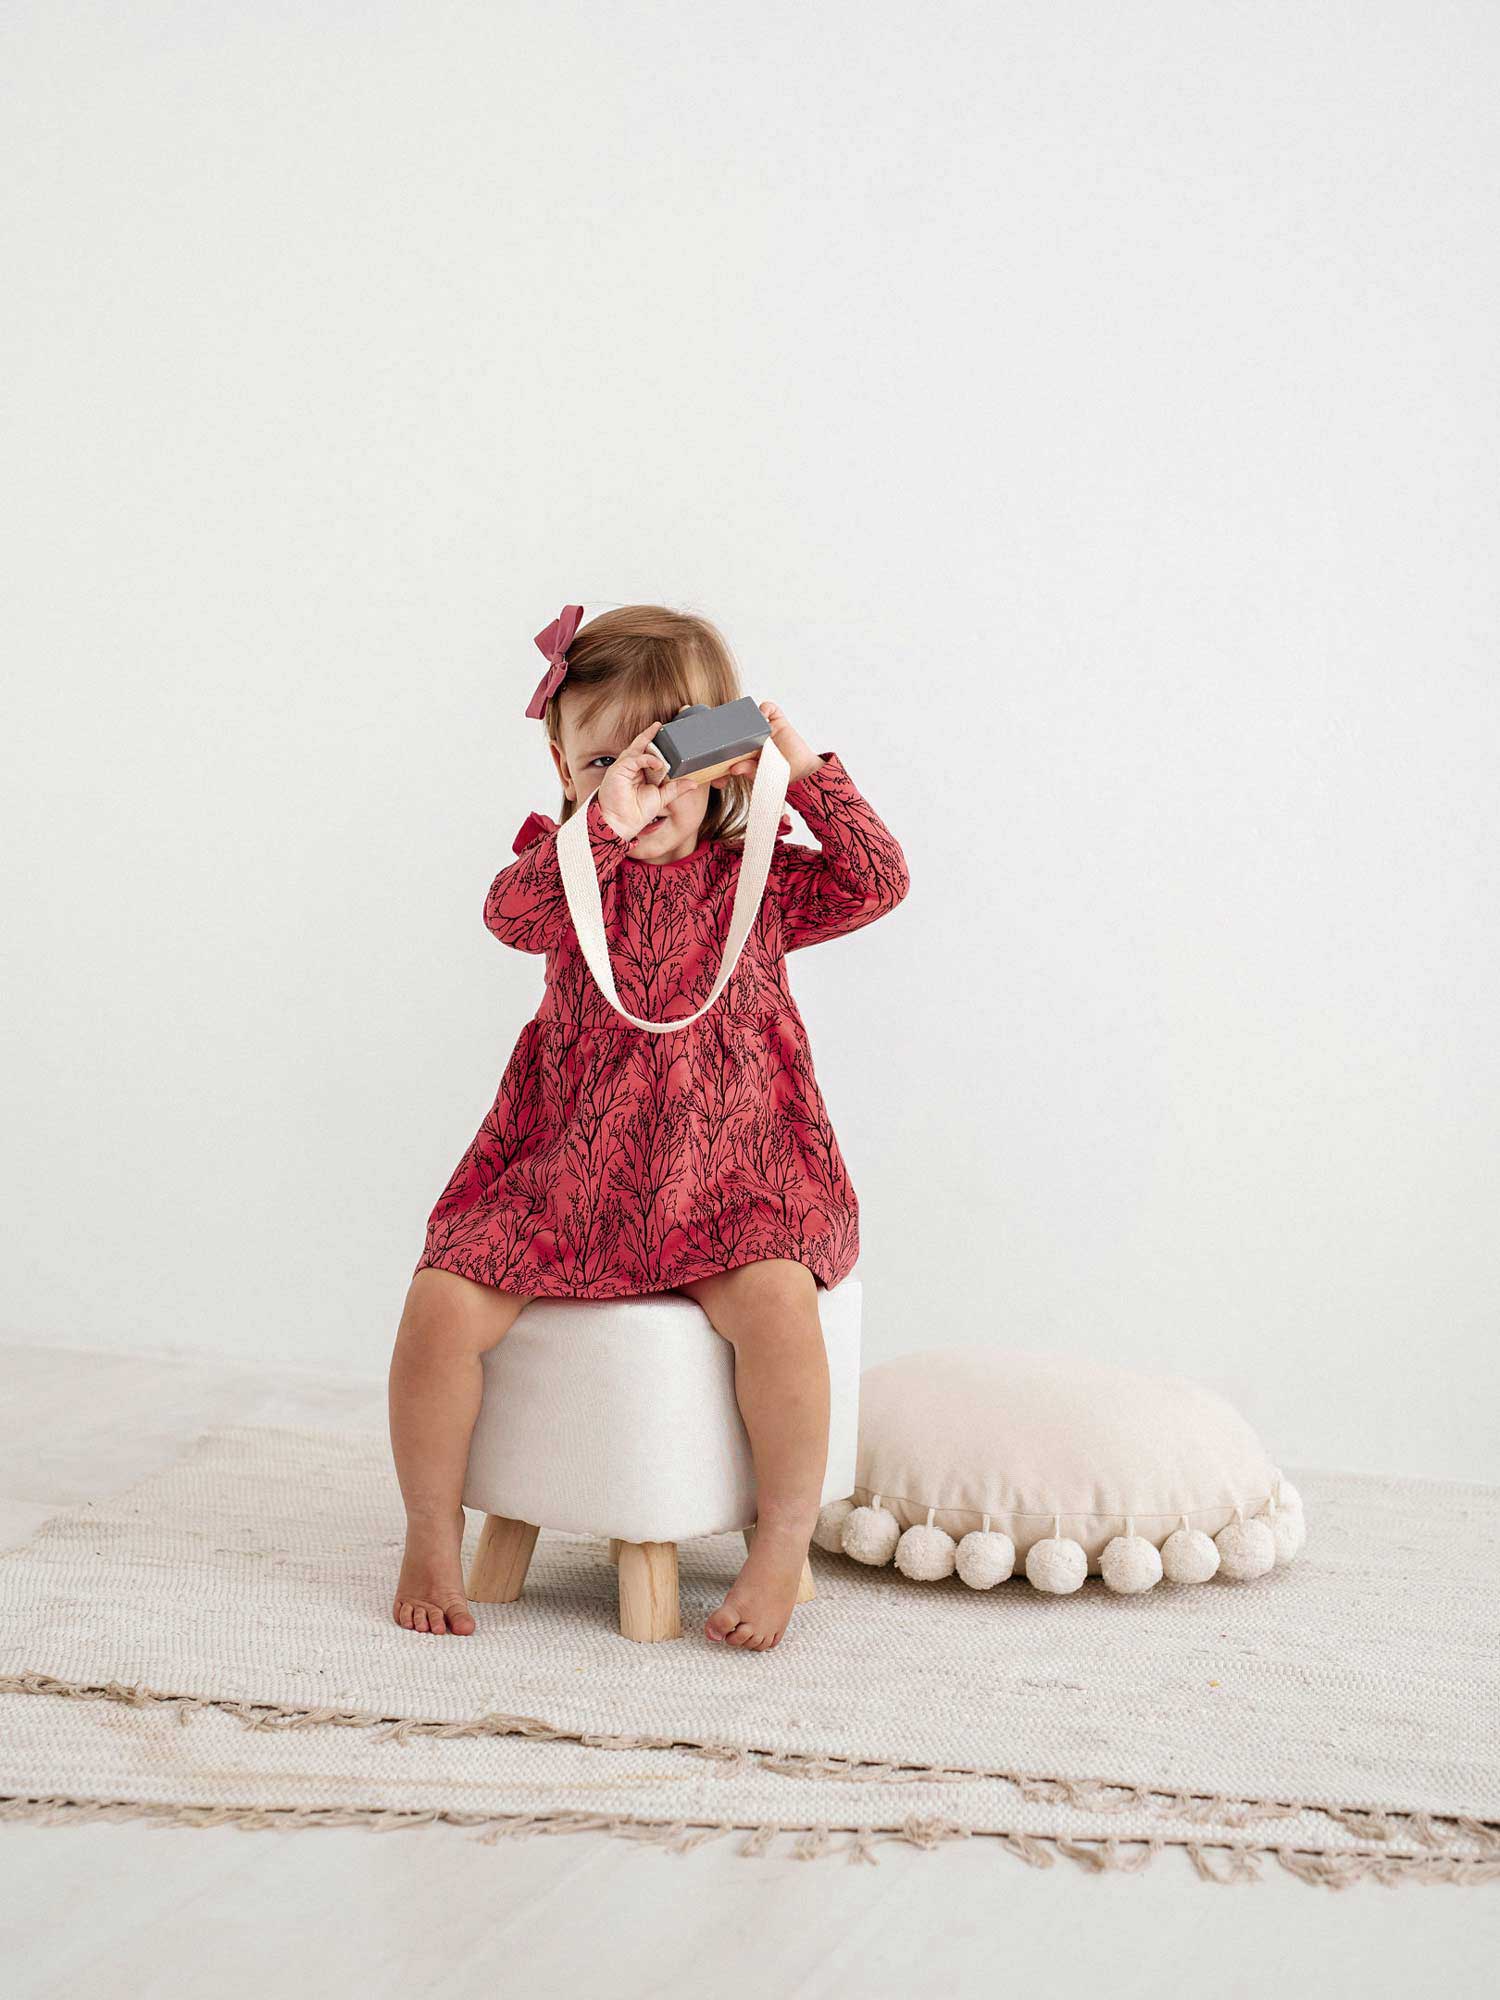 The fabric is 100% cotton and has been certified by Oeko-Tex Standard 100 for product safety so you can be sure that no harsh chemicals are used in the making of this adorable dress.